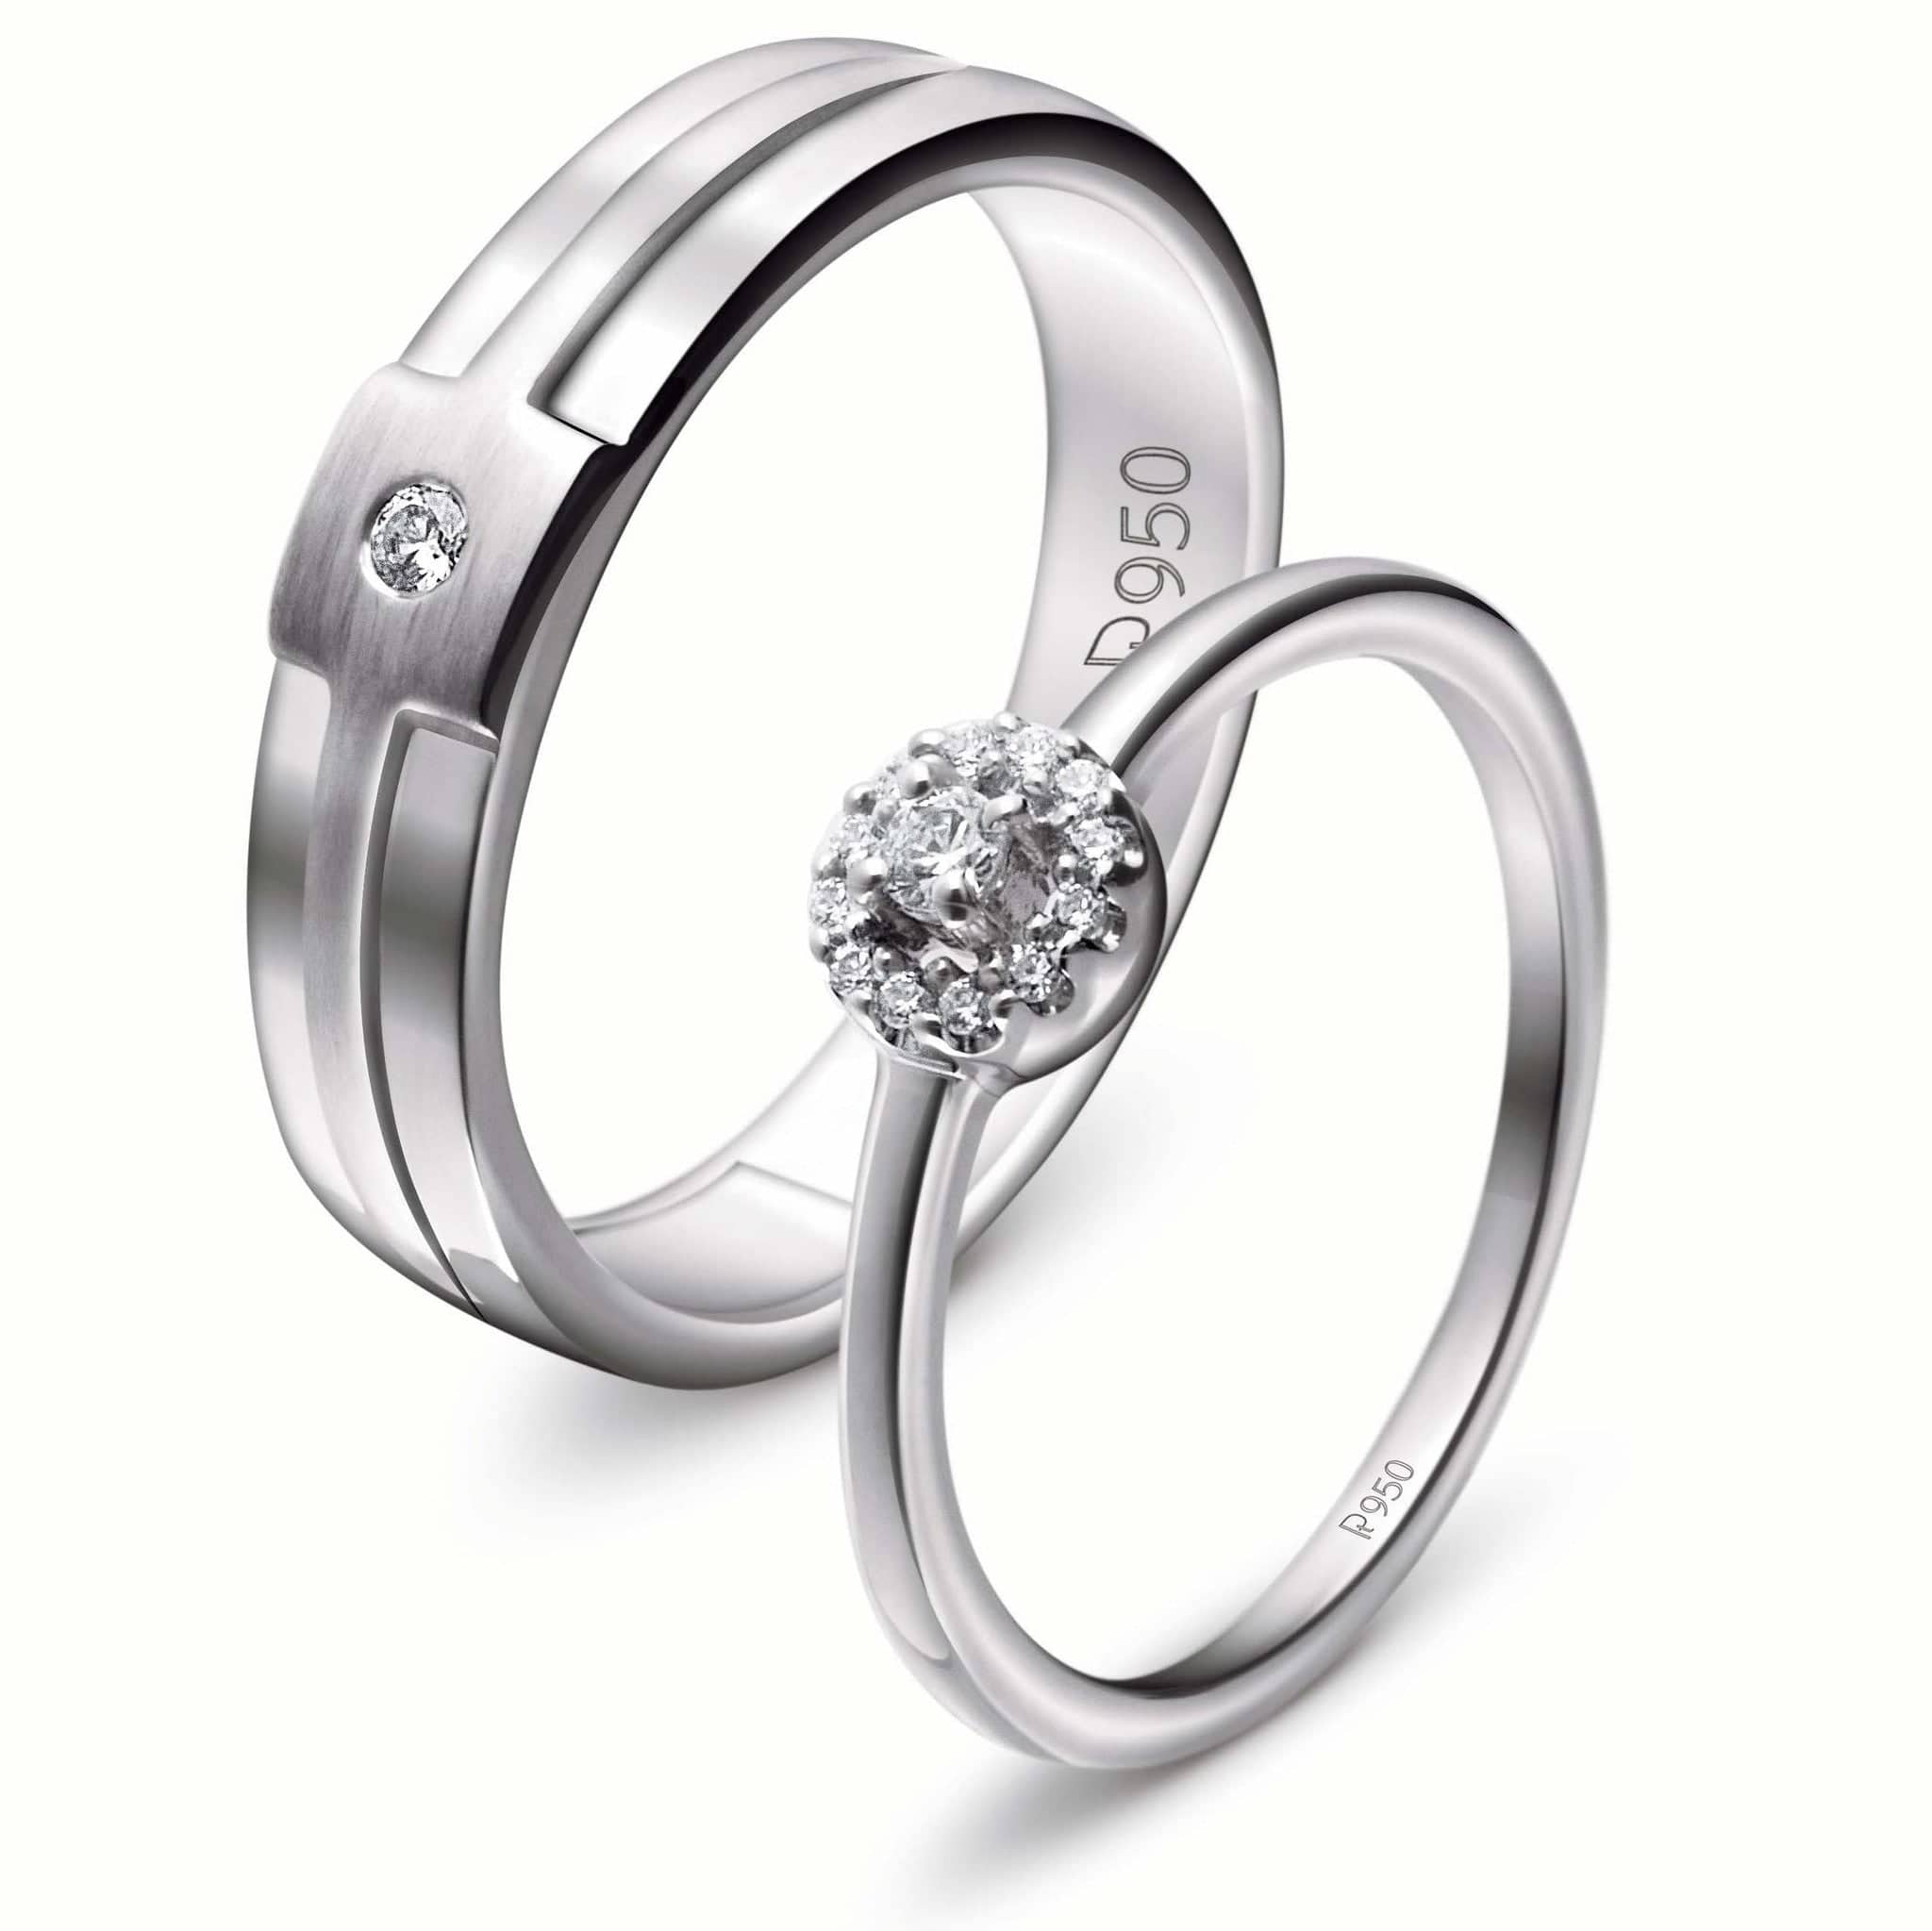 Couple Engagement Rings Valentine Day | Free Shipping Ring Couples -  2pcs/set Couple - Aliexpress